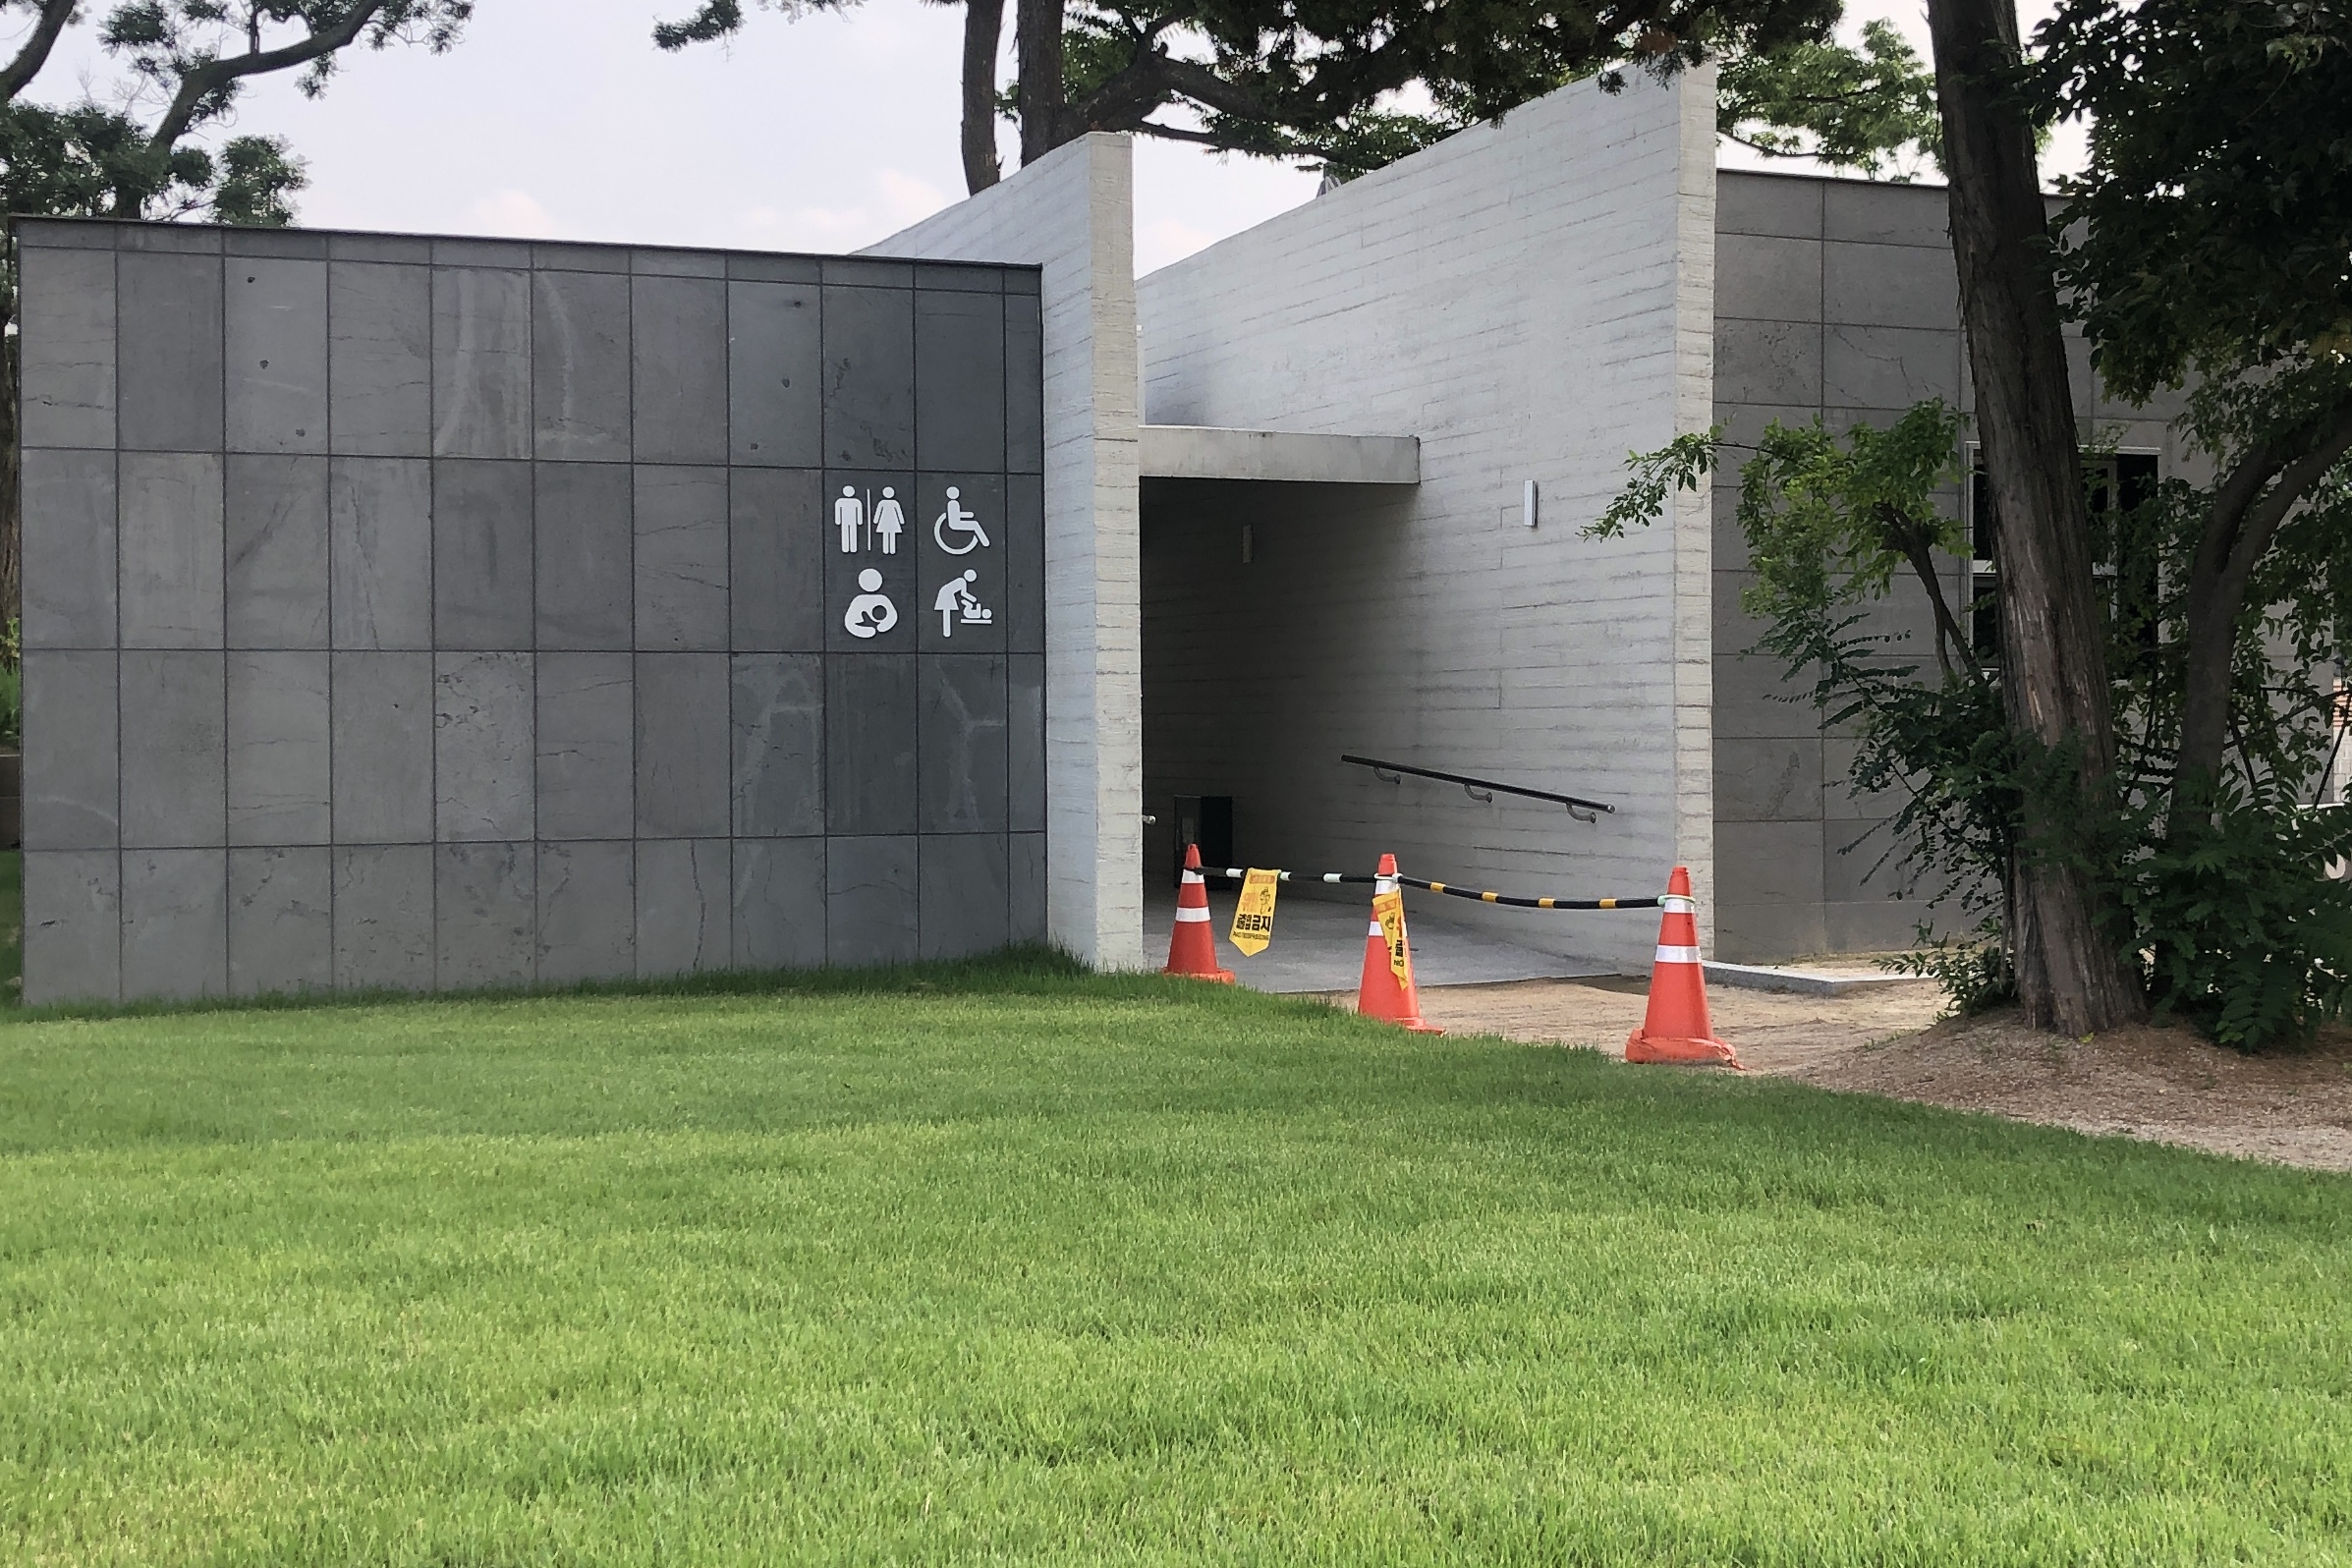 Accessible restroom for persons with disabilities0 : Toilet building in front of lawn with pictograms of toilet, wheelchair, nursing room, and diaper changing station
